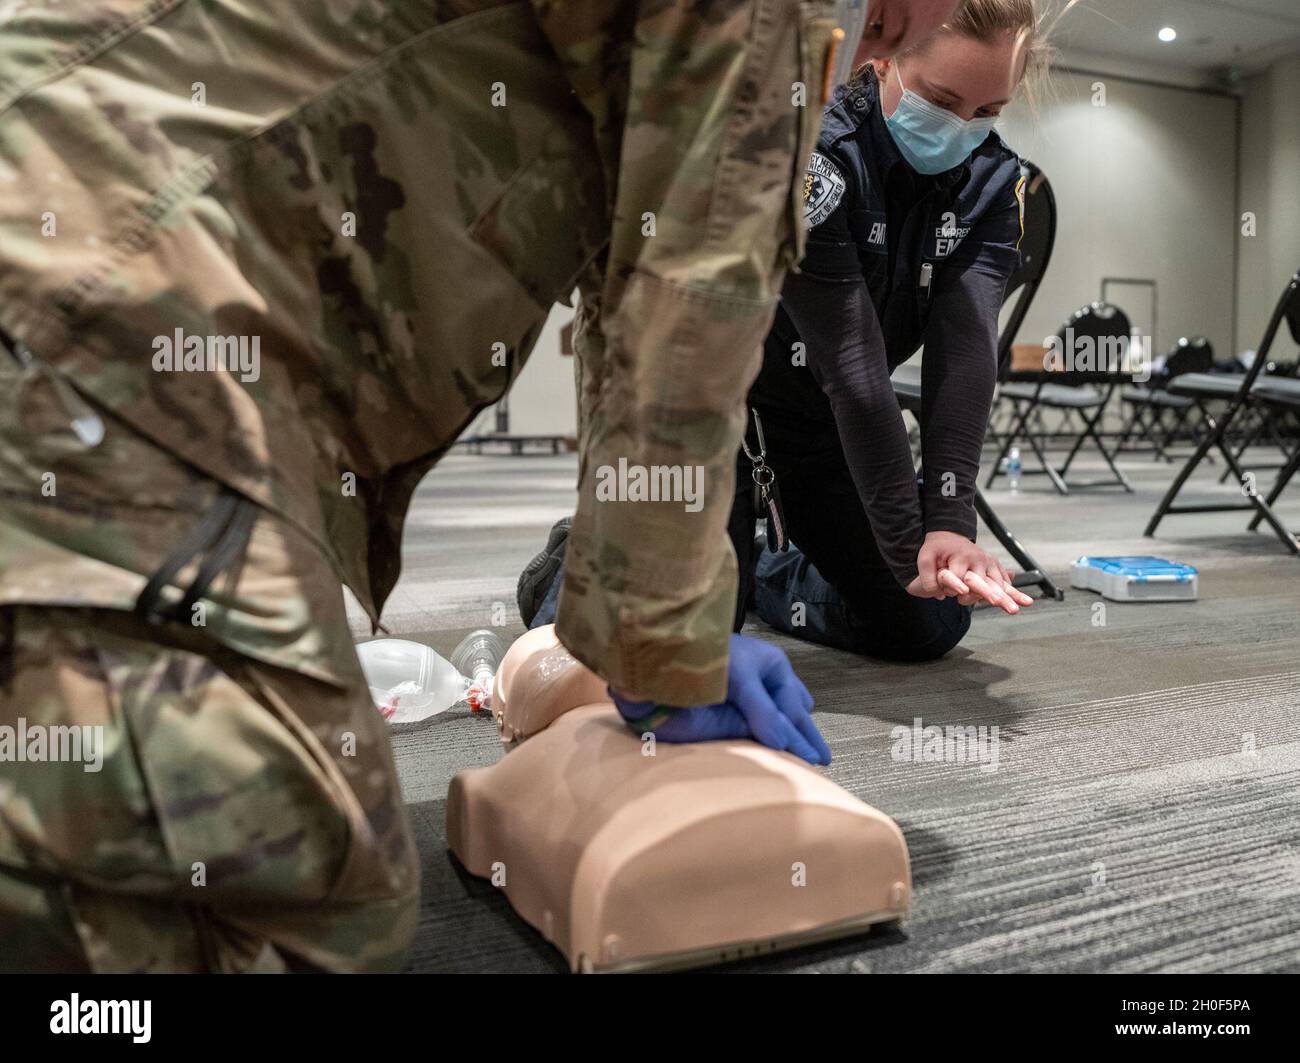 U.S. Army 1st Lt. Jack Stapleton, assigned to A Co. 1st Battalion 69th Infantry Regiment, 27th Infantry Brigade Combat Team, 42nd Infantry Division, is guided by instructor Emily Beckett, as he receive a class on Cardiopulmonary resuscitation, which is an emergency procedure that combines chest compressions often with artificial ventilation to manually preserve intact brain function until further measures are taken to restore spontaneous blood circulation and breathing in a person who is in cardiac arrest, from Empress Emergency Medical Services, in support of state efforts to provide mass COV Stock Photo